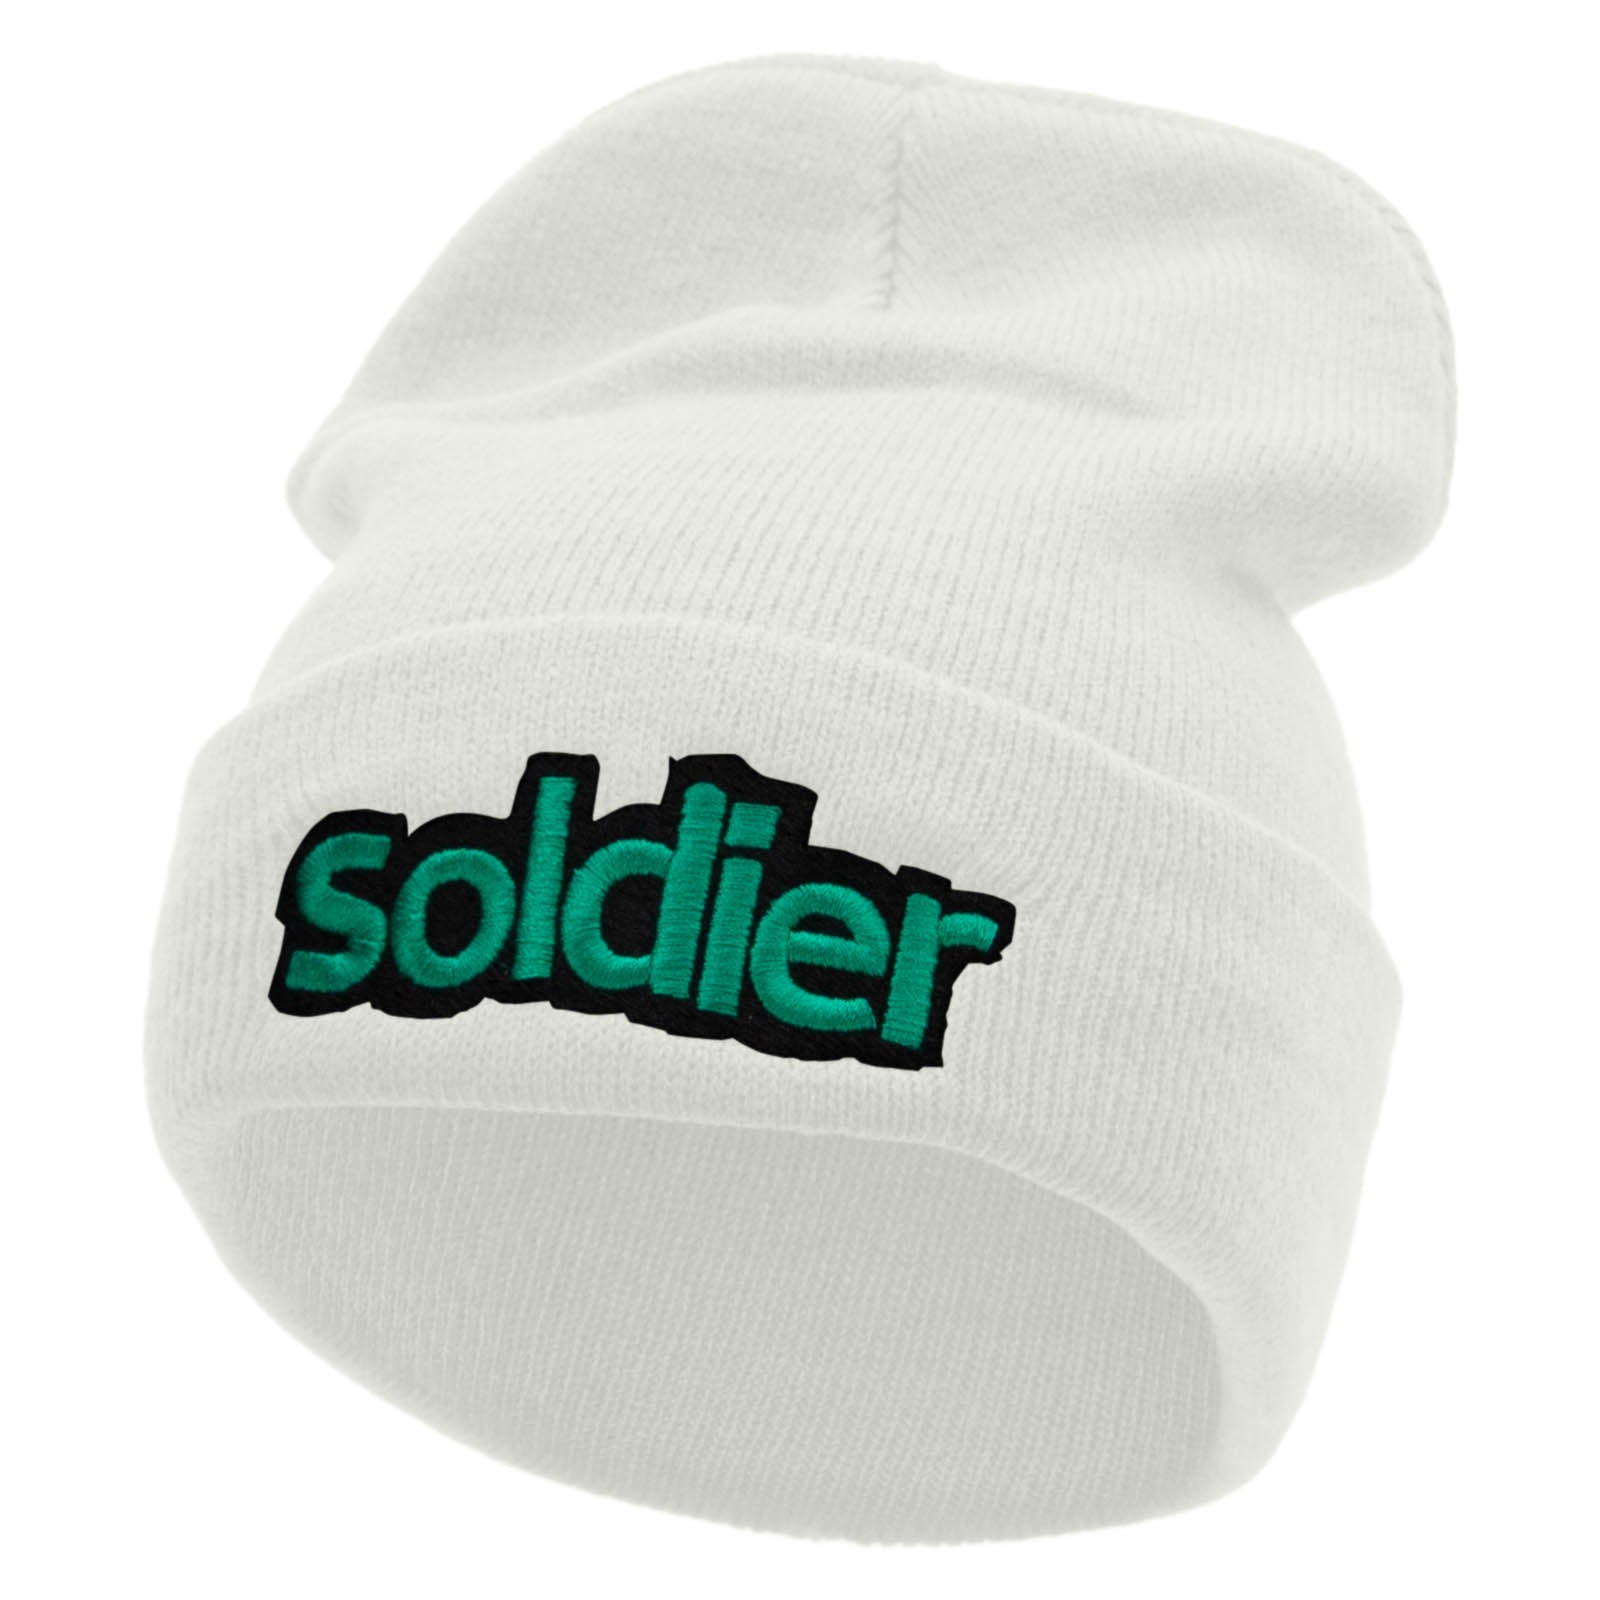 Soldier Embroidered 12 Inch Long Knitted Beanie - White OSFM